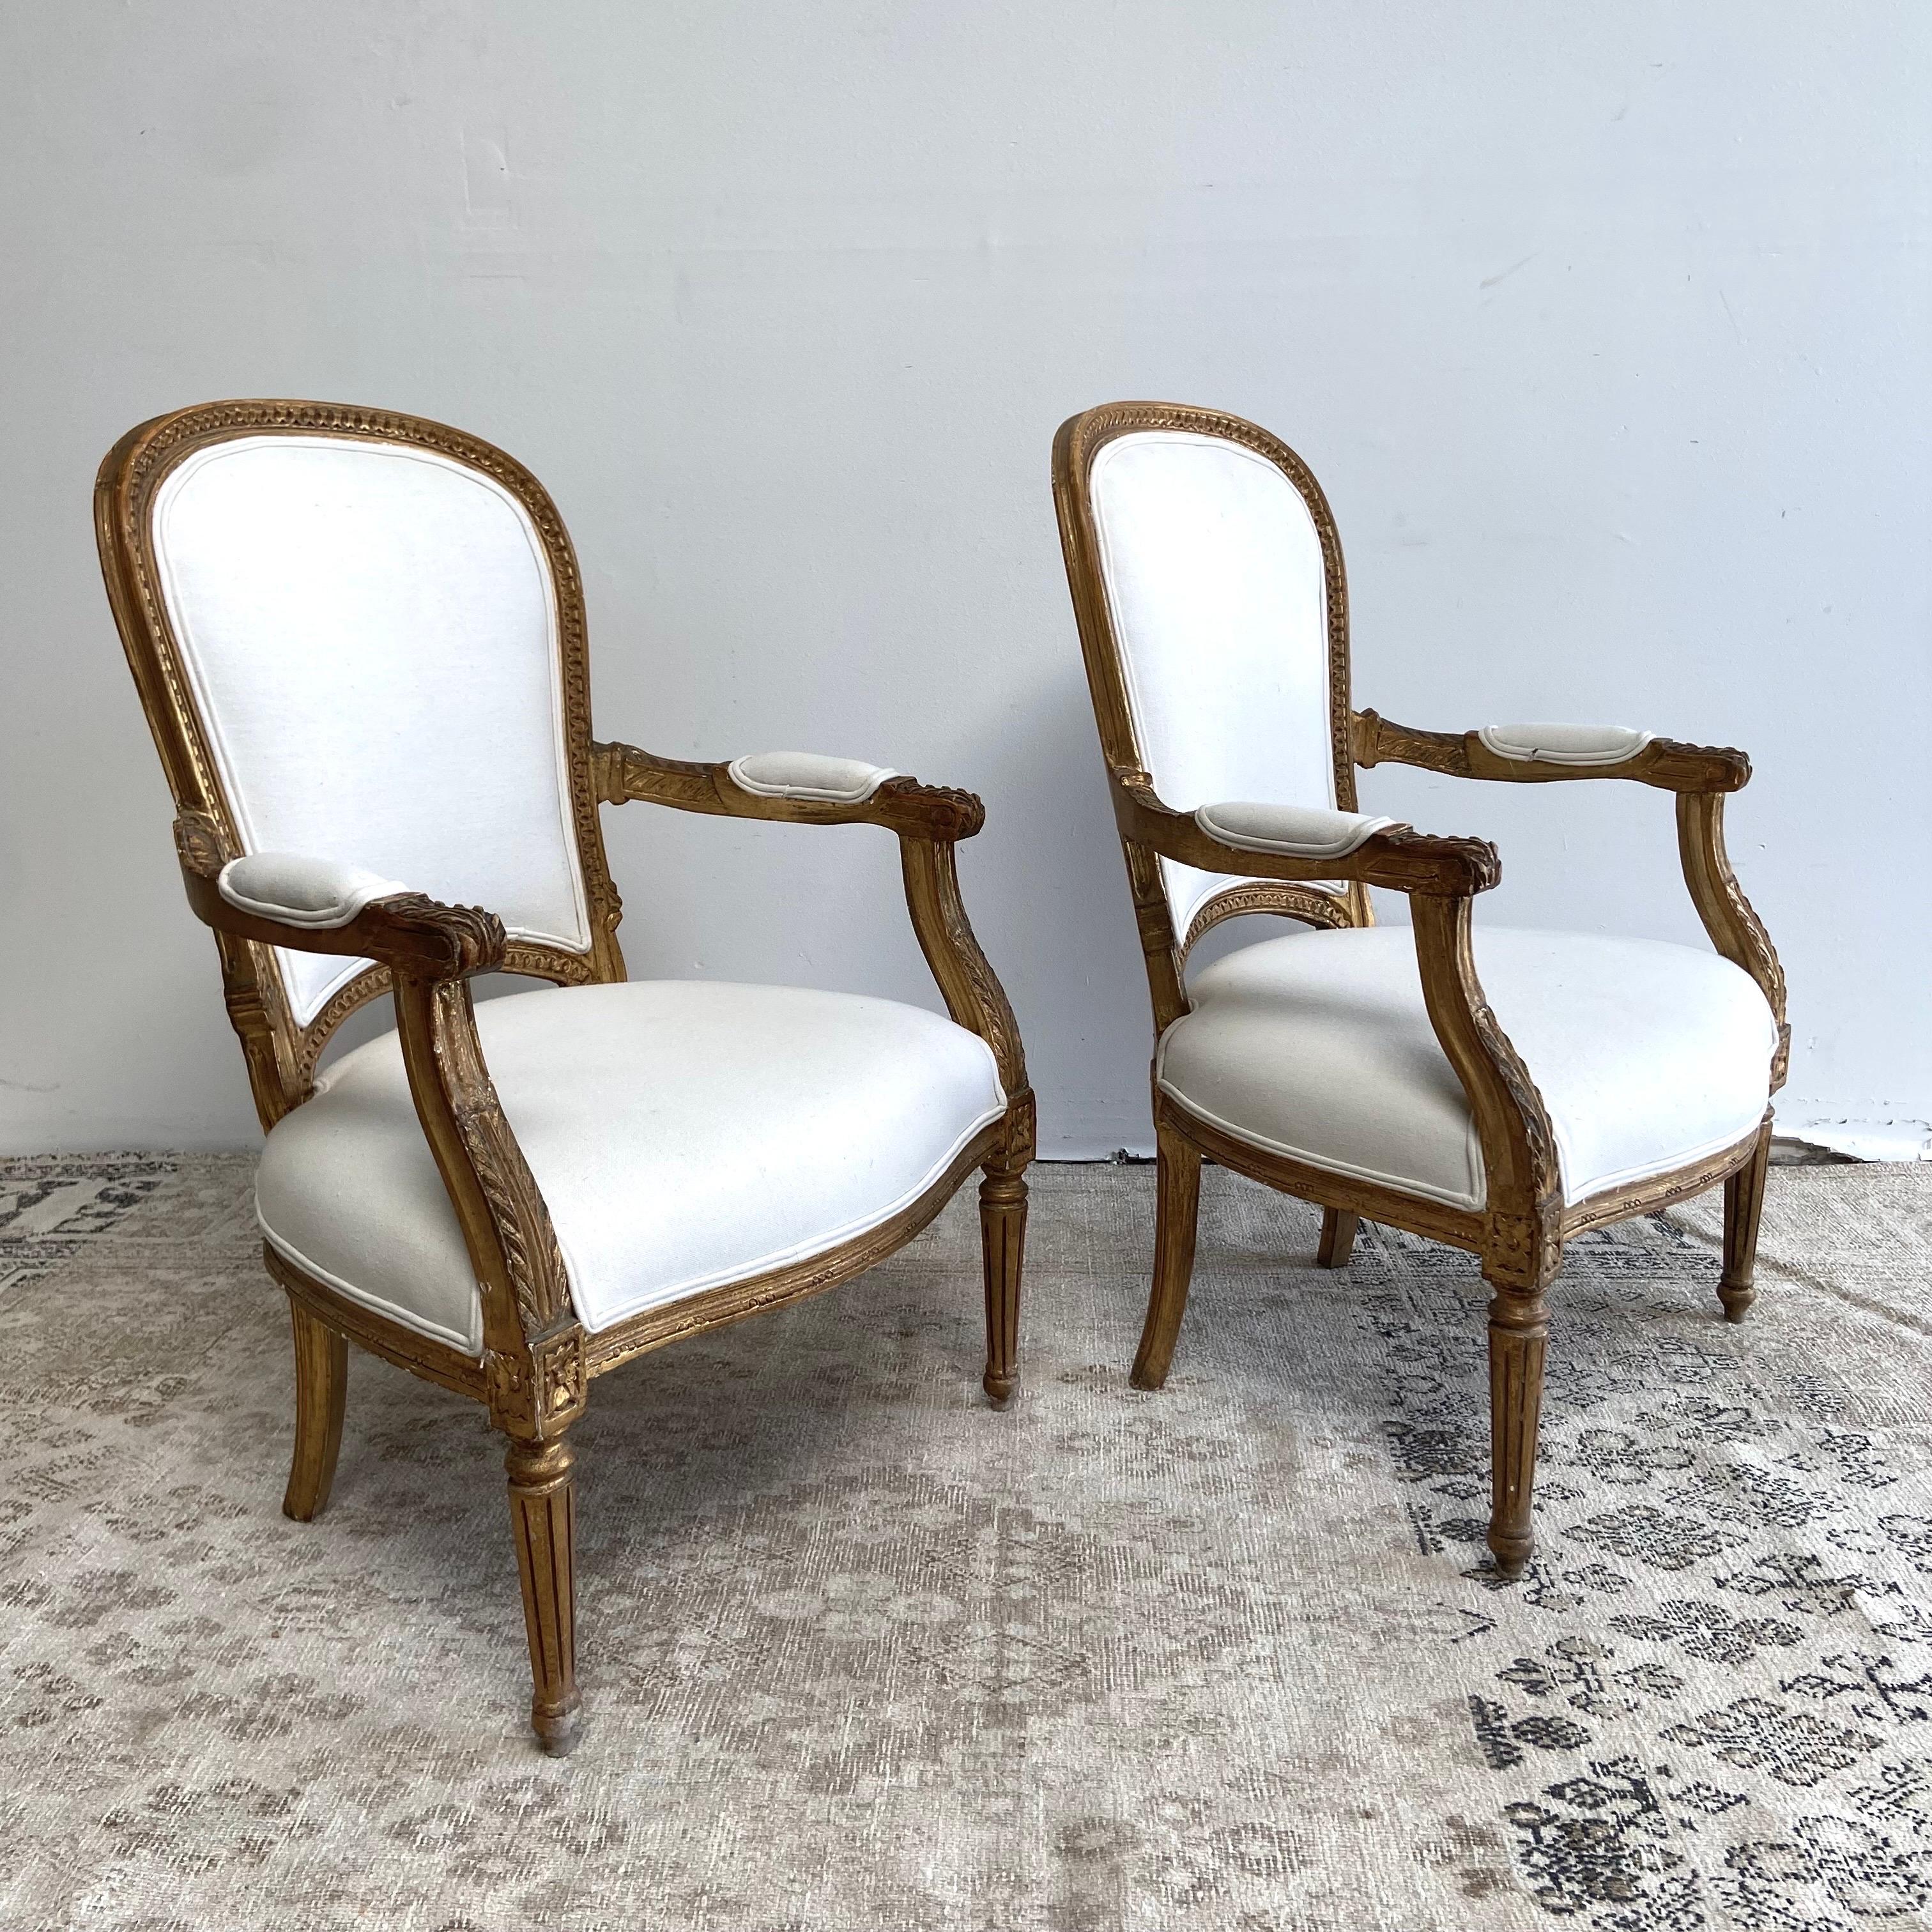 Vintage French Style Louis XVI Open Arm Chairs with Linen Upholstery In Good Condition For Sale In Brea, CA